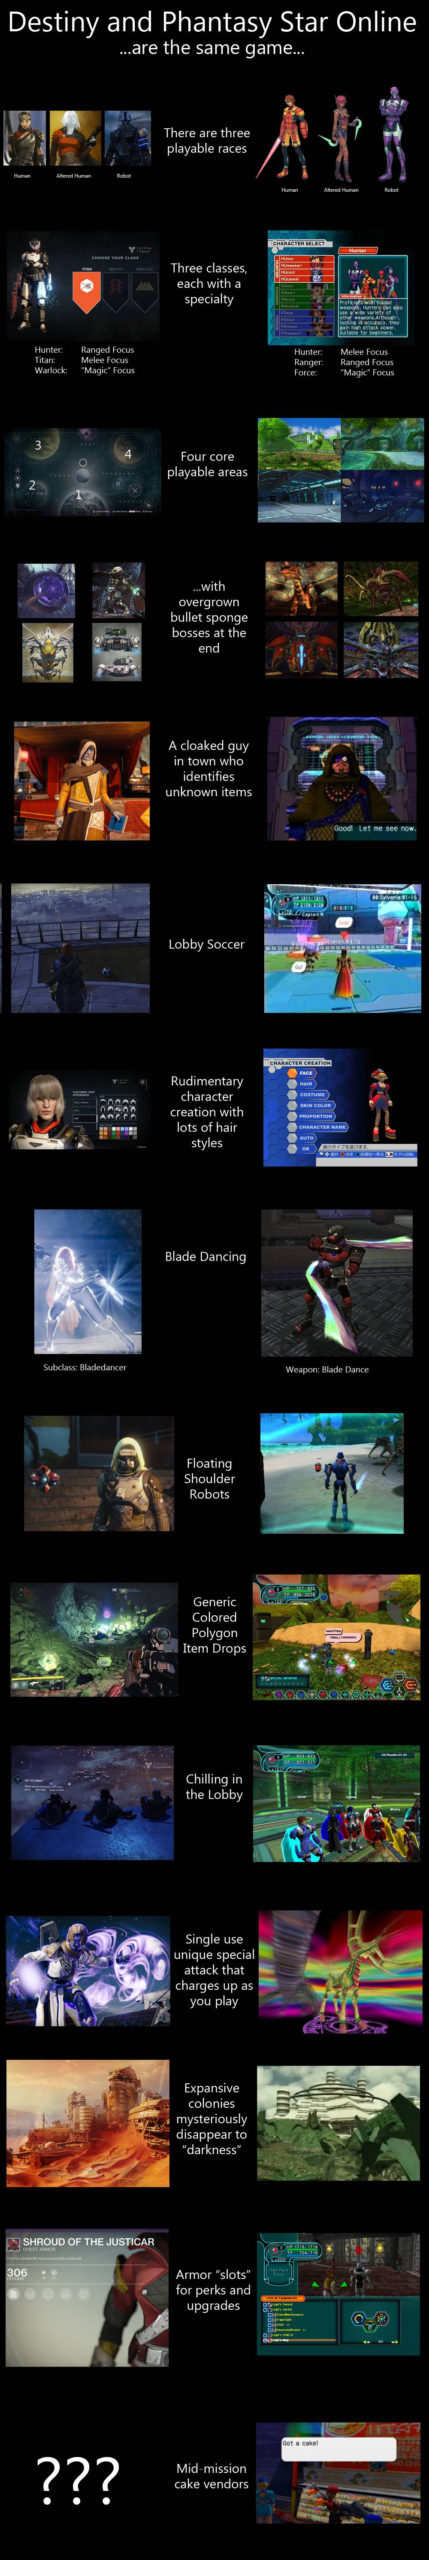 Destiny And Phantasy Star Online Have An Awful Lot In Common